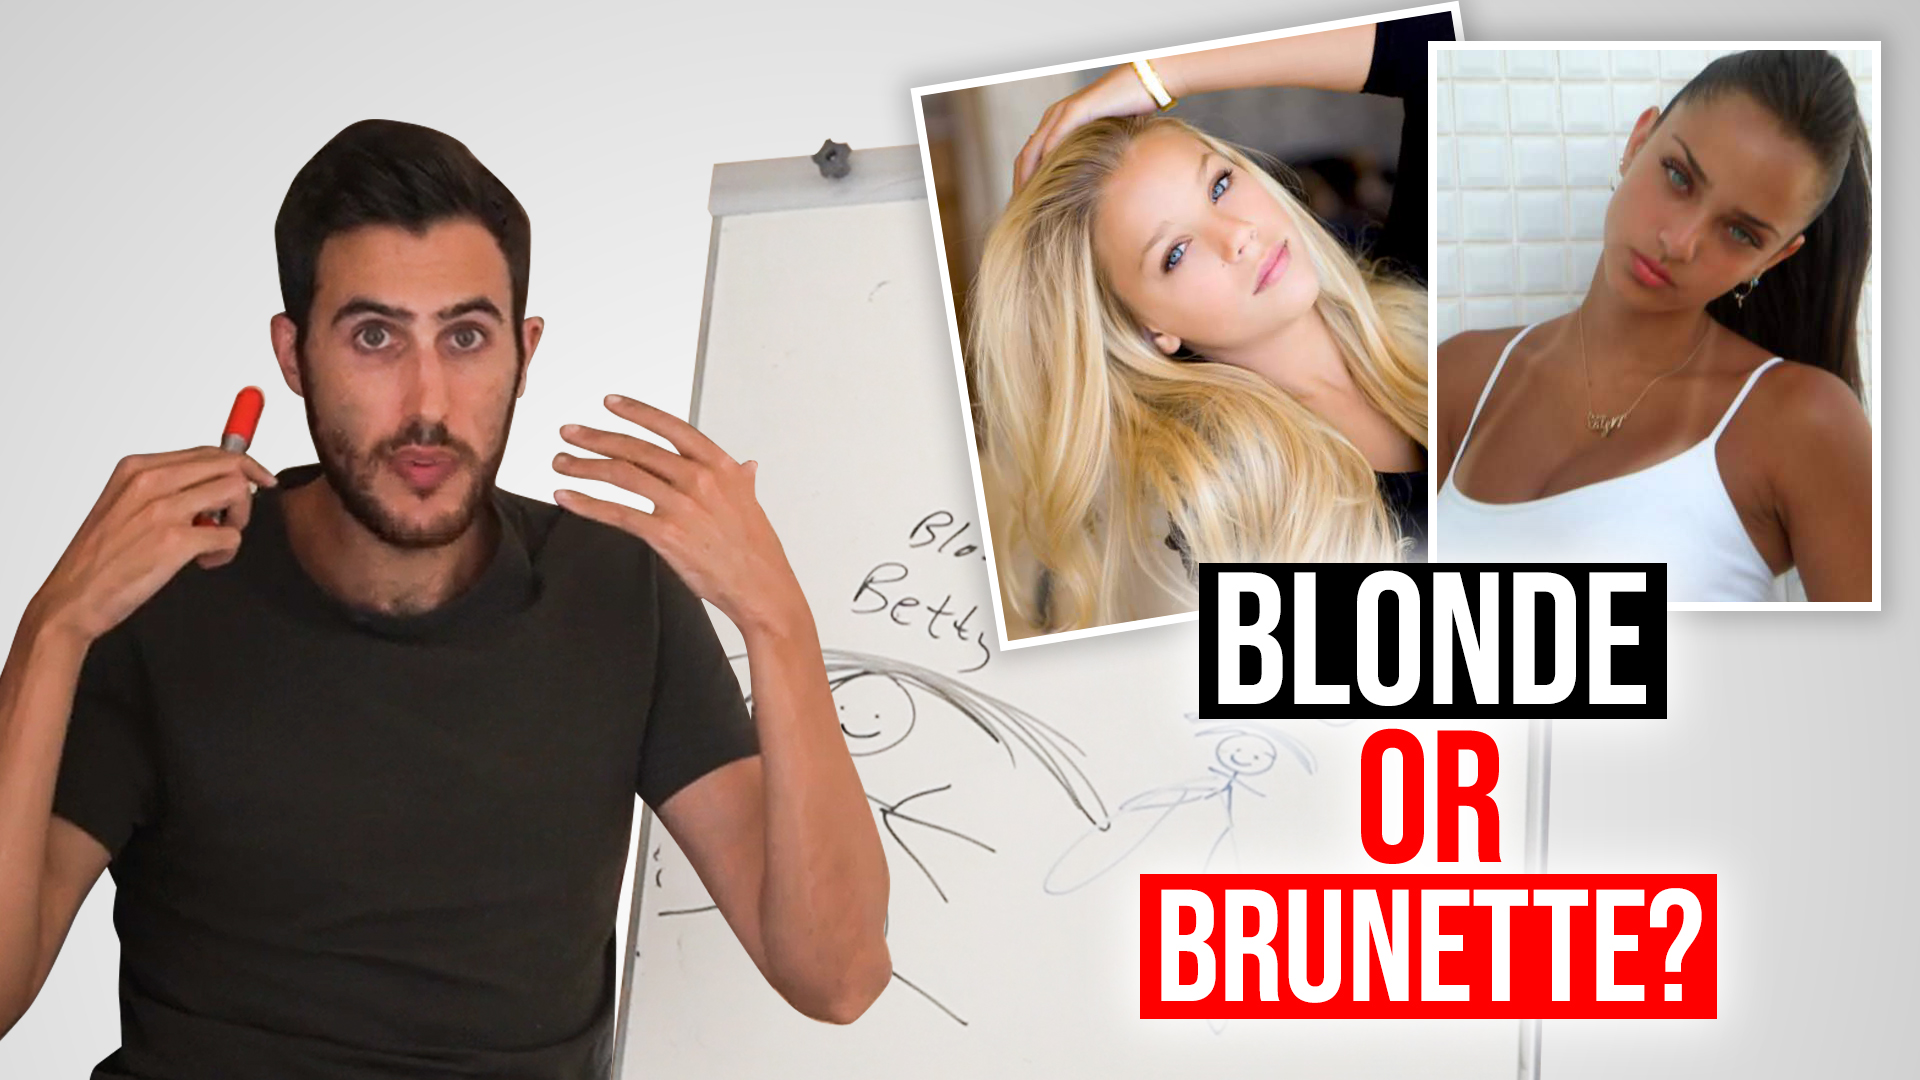 Blondes Vs. Brunettes (This Is Why I Love Brunettes…)